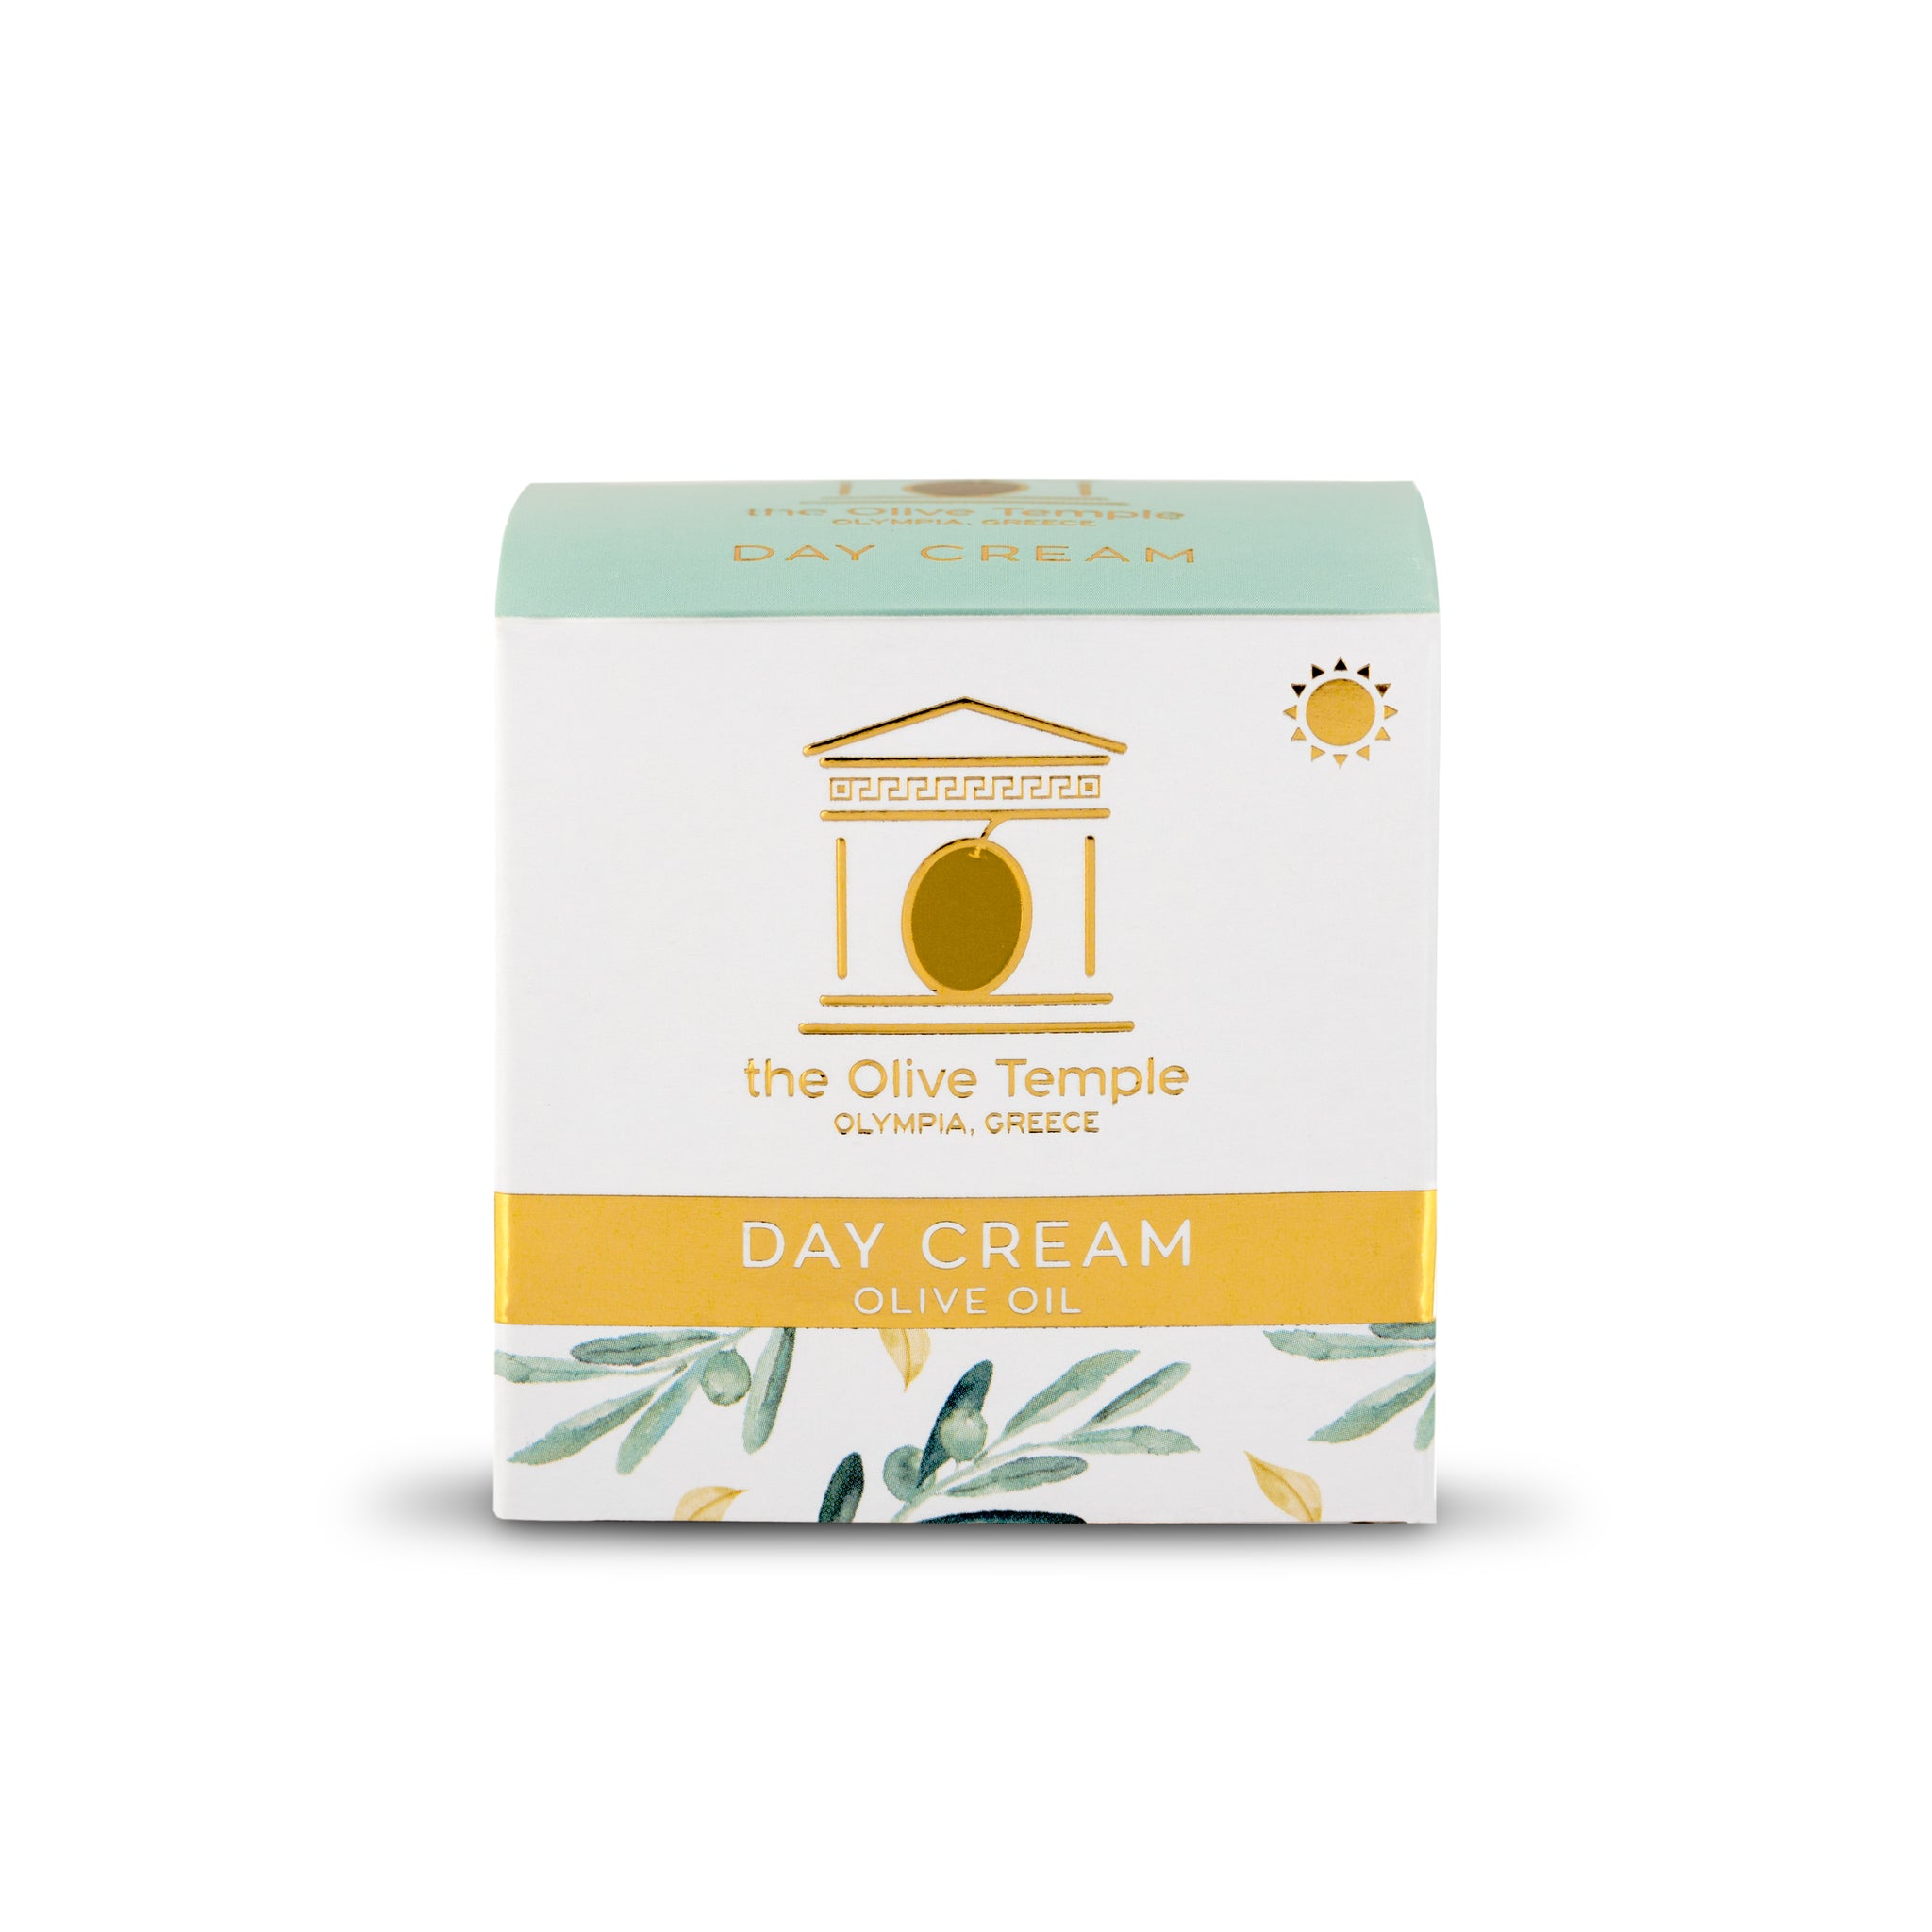 Anti-Aging Day Cream With Olive Oil, Argan & Grape Juice Polyphenols and Cross-Linked Hyaluronic Acid